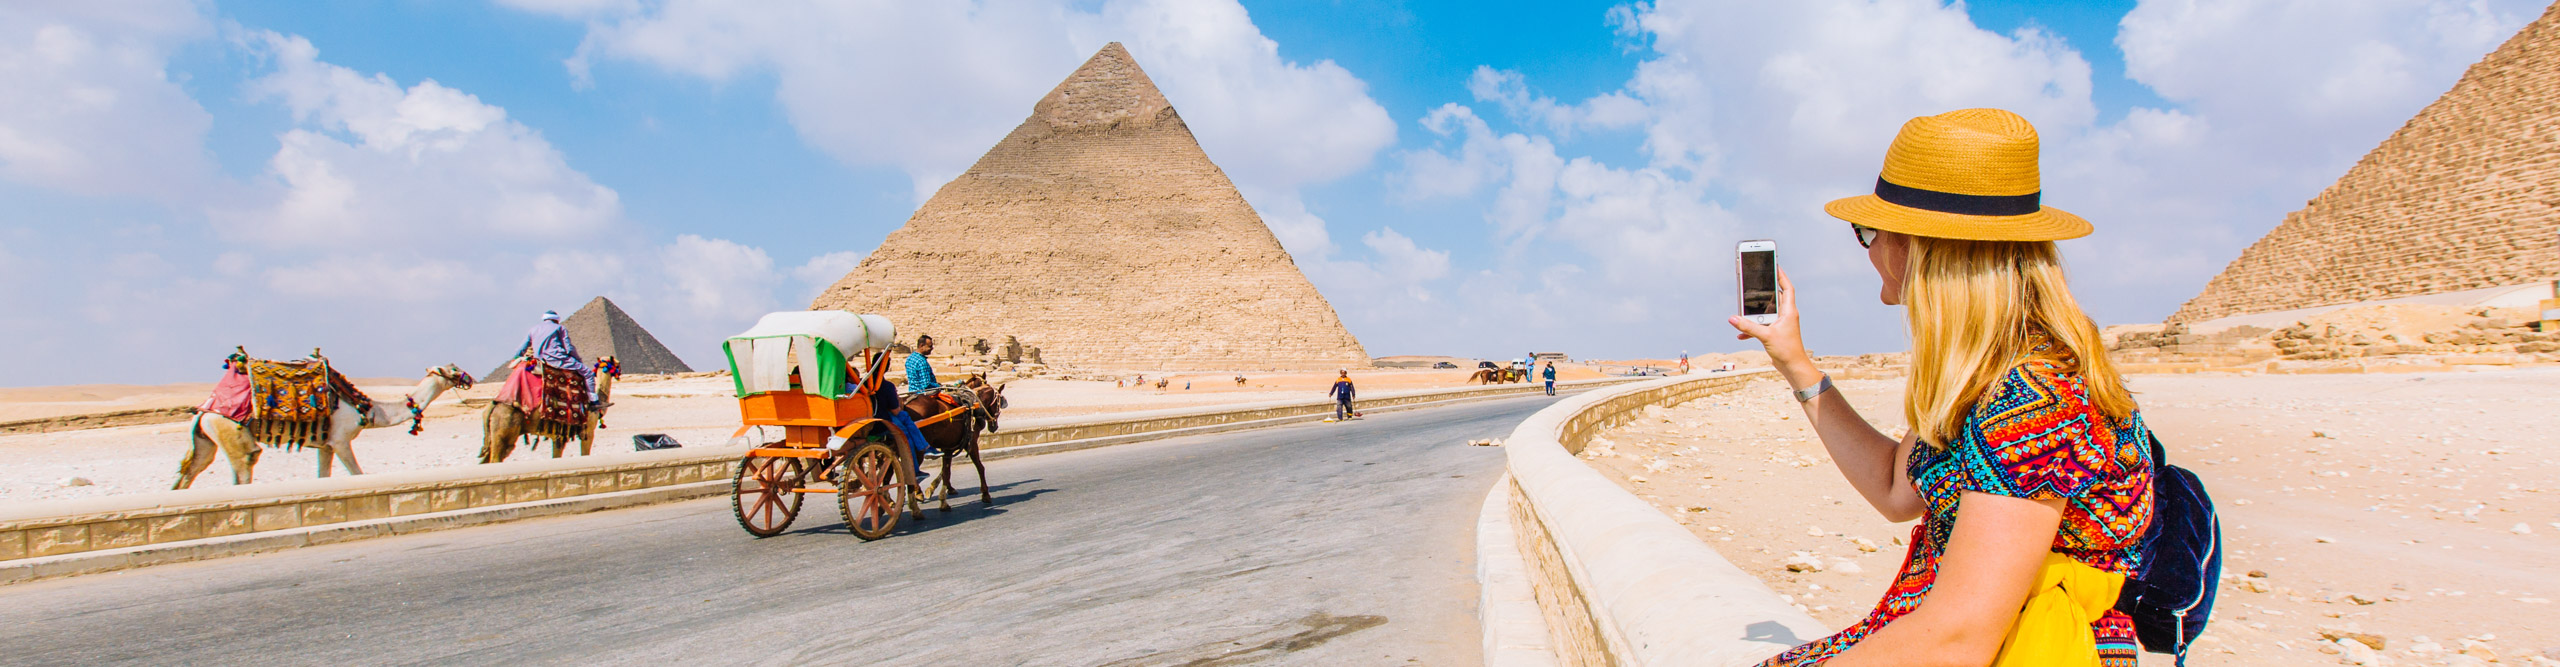 Woman taking pictures of pyramid with people riding camels nearby on a sunny day, Egypt